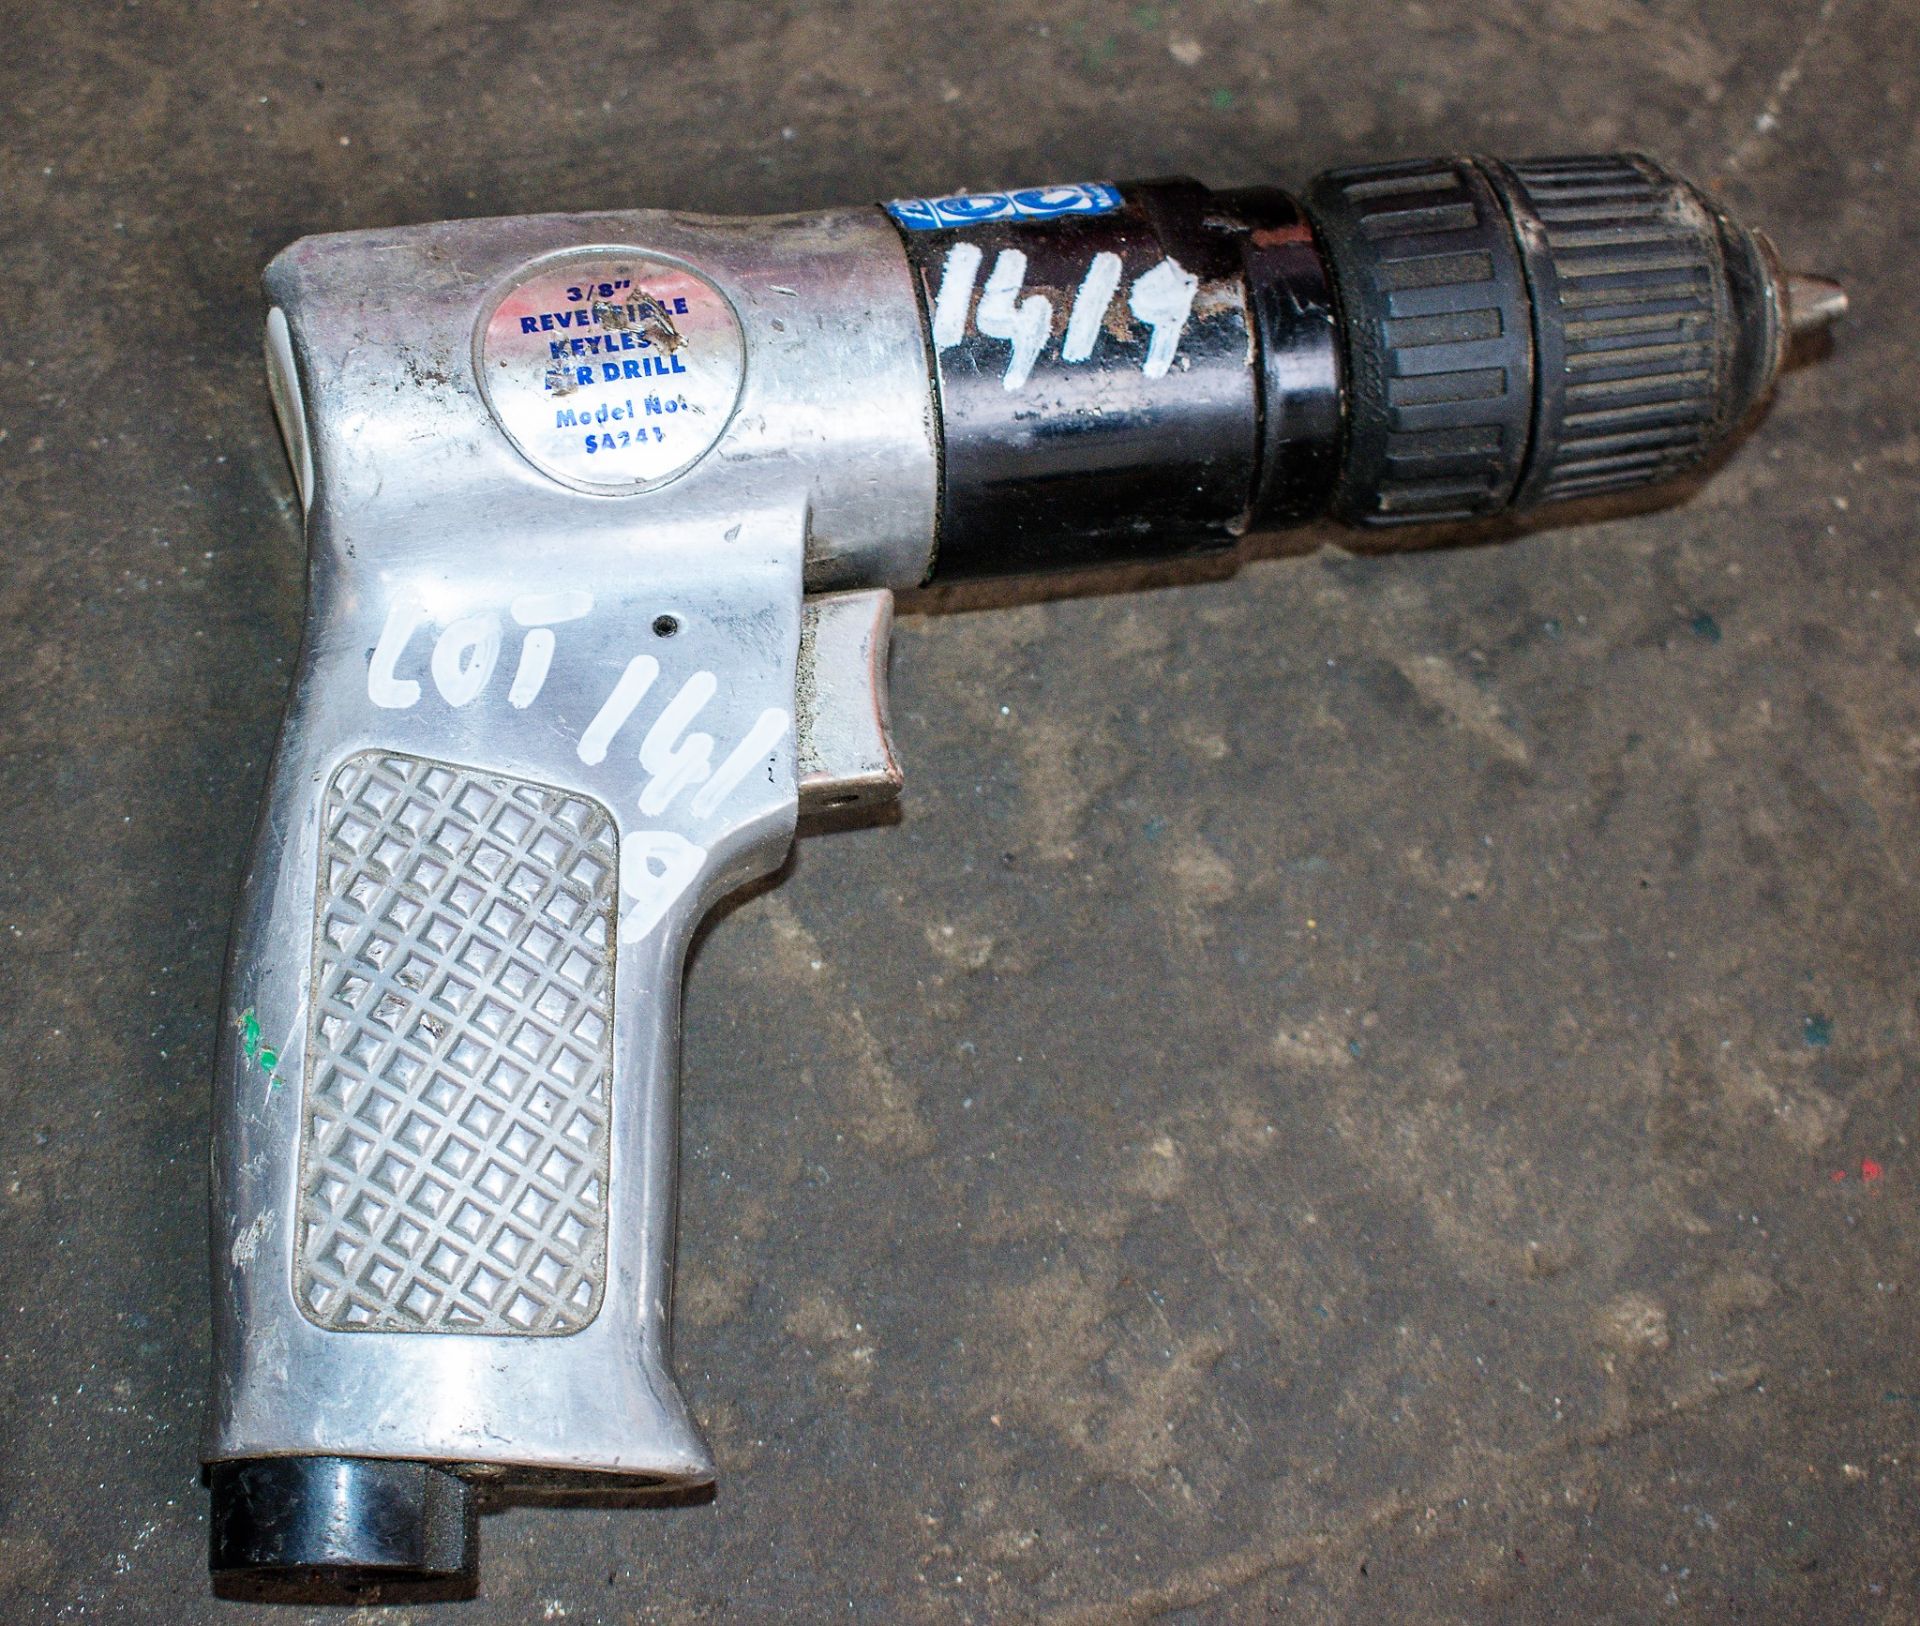 Pneumatic drill A598393 **No VAT charged on hammer, but VAT will be charged on the buyers premium**